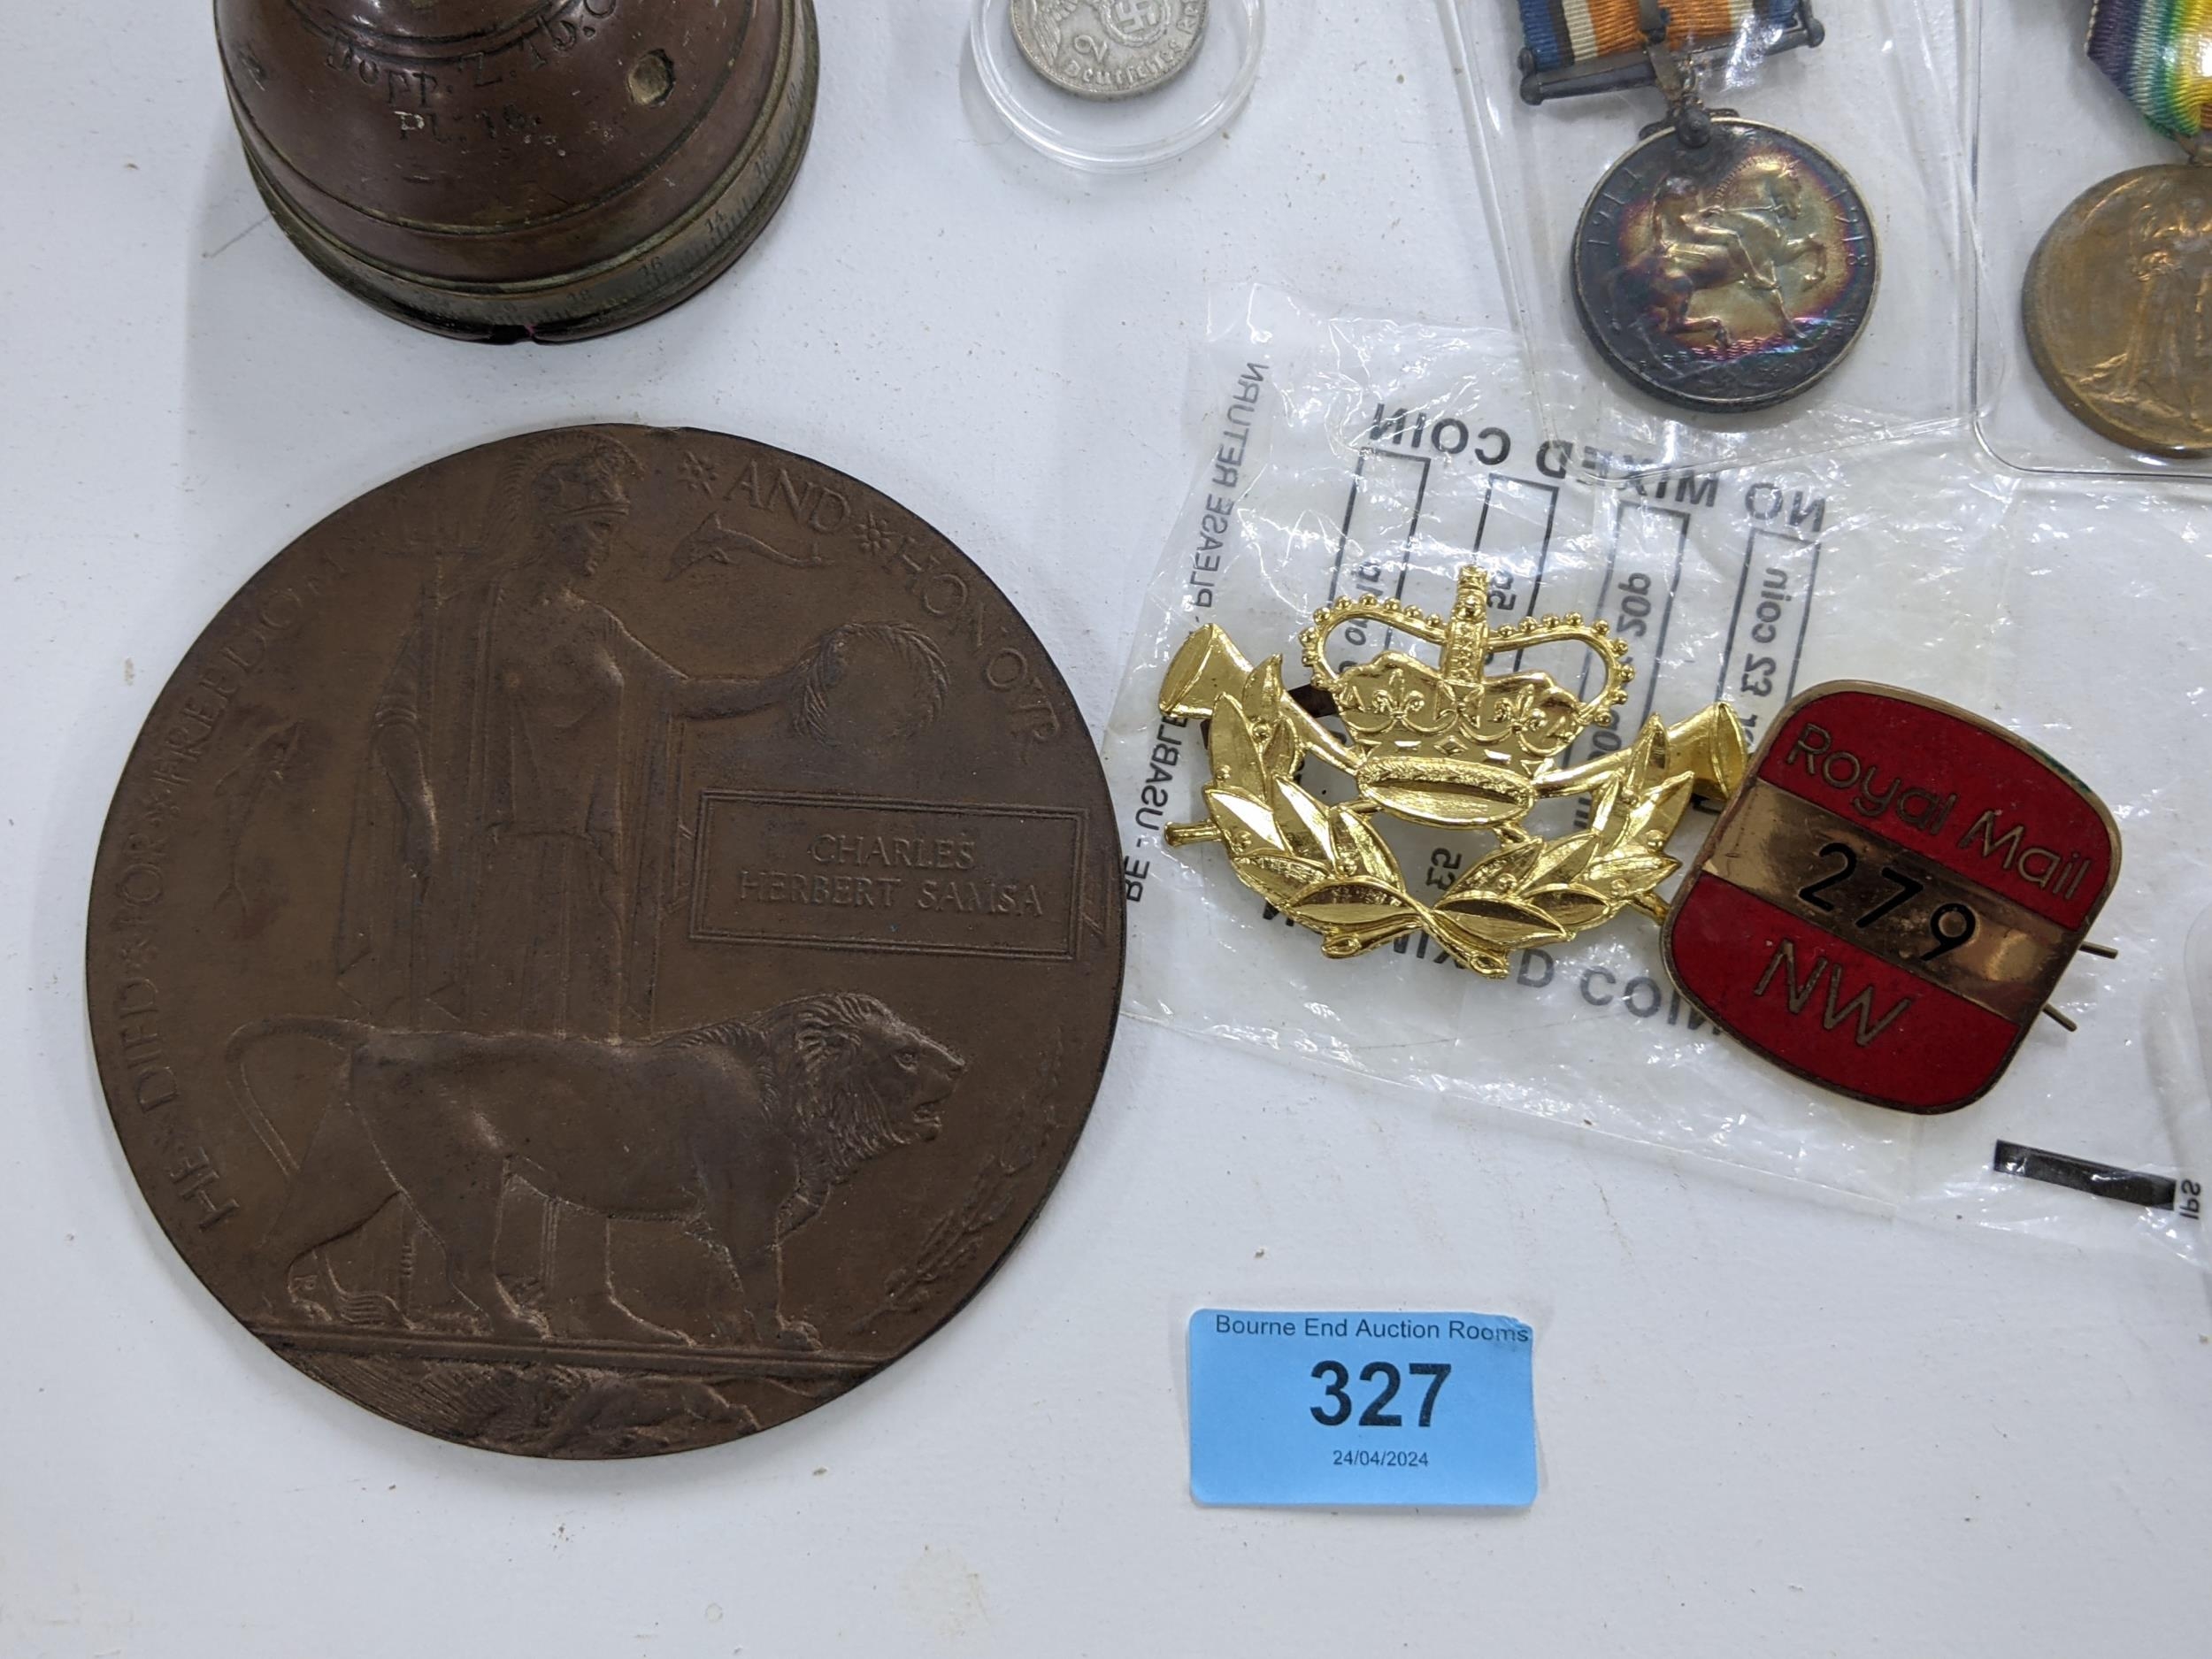 Militaria to include a memorial plaque, medals, a silver boxing trophy, cap badge, and German coin - Image 4 of 8